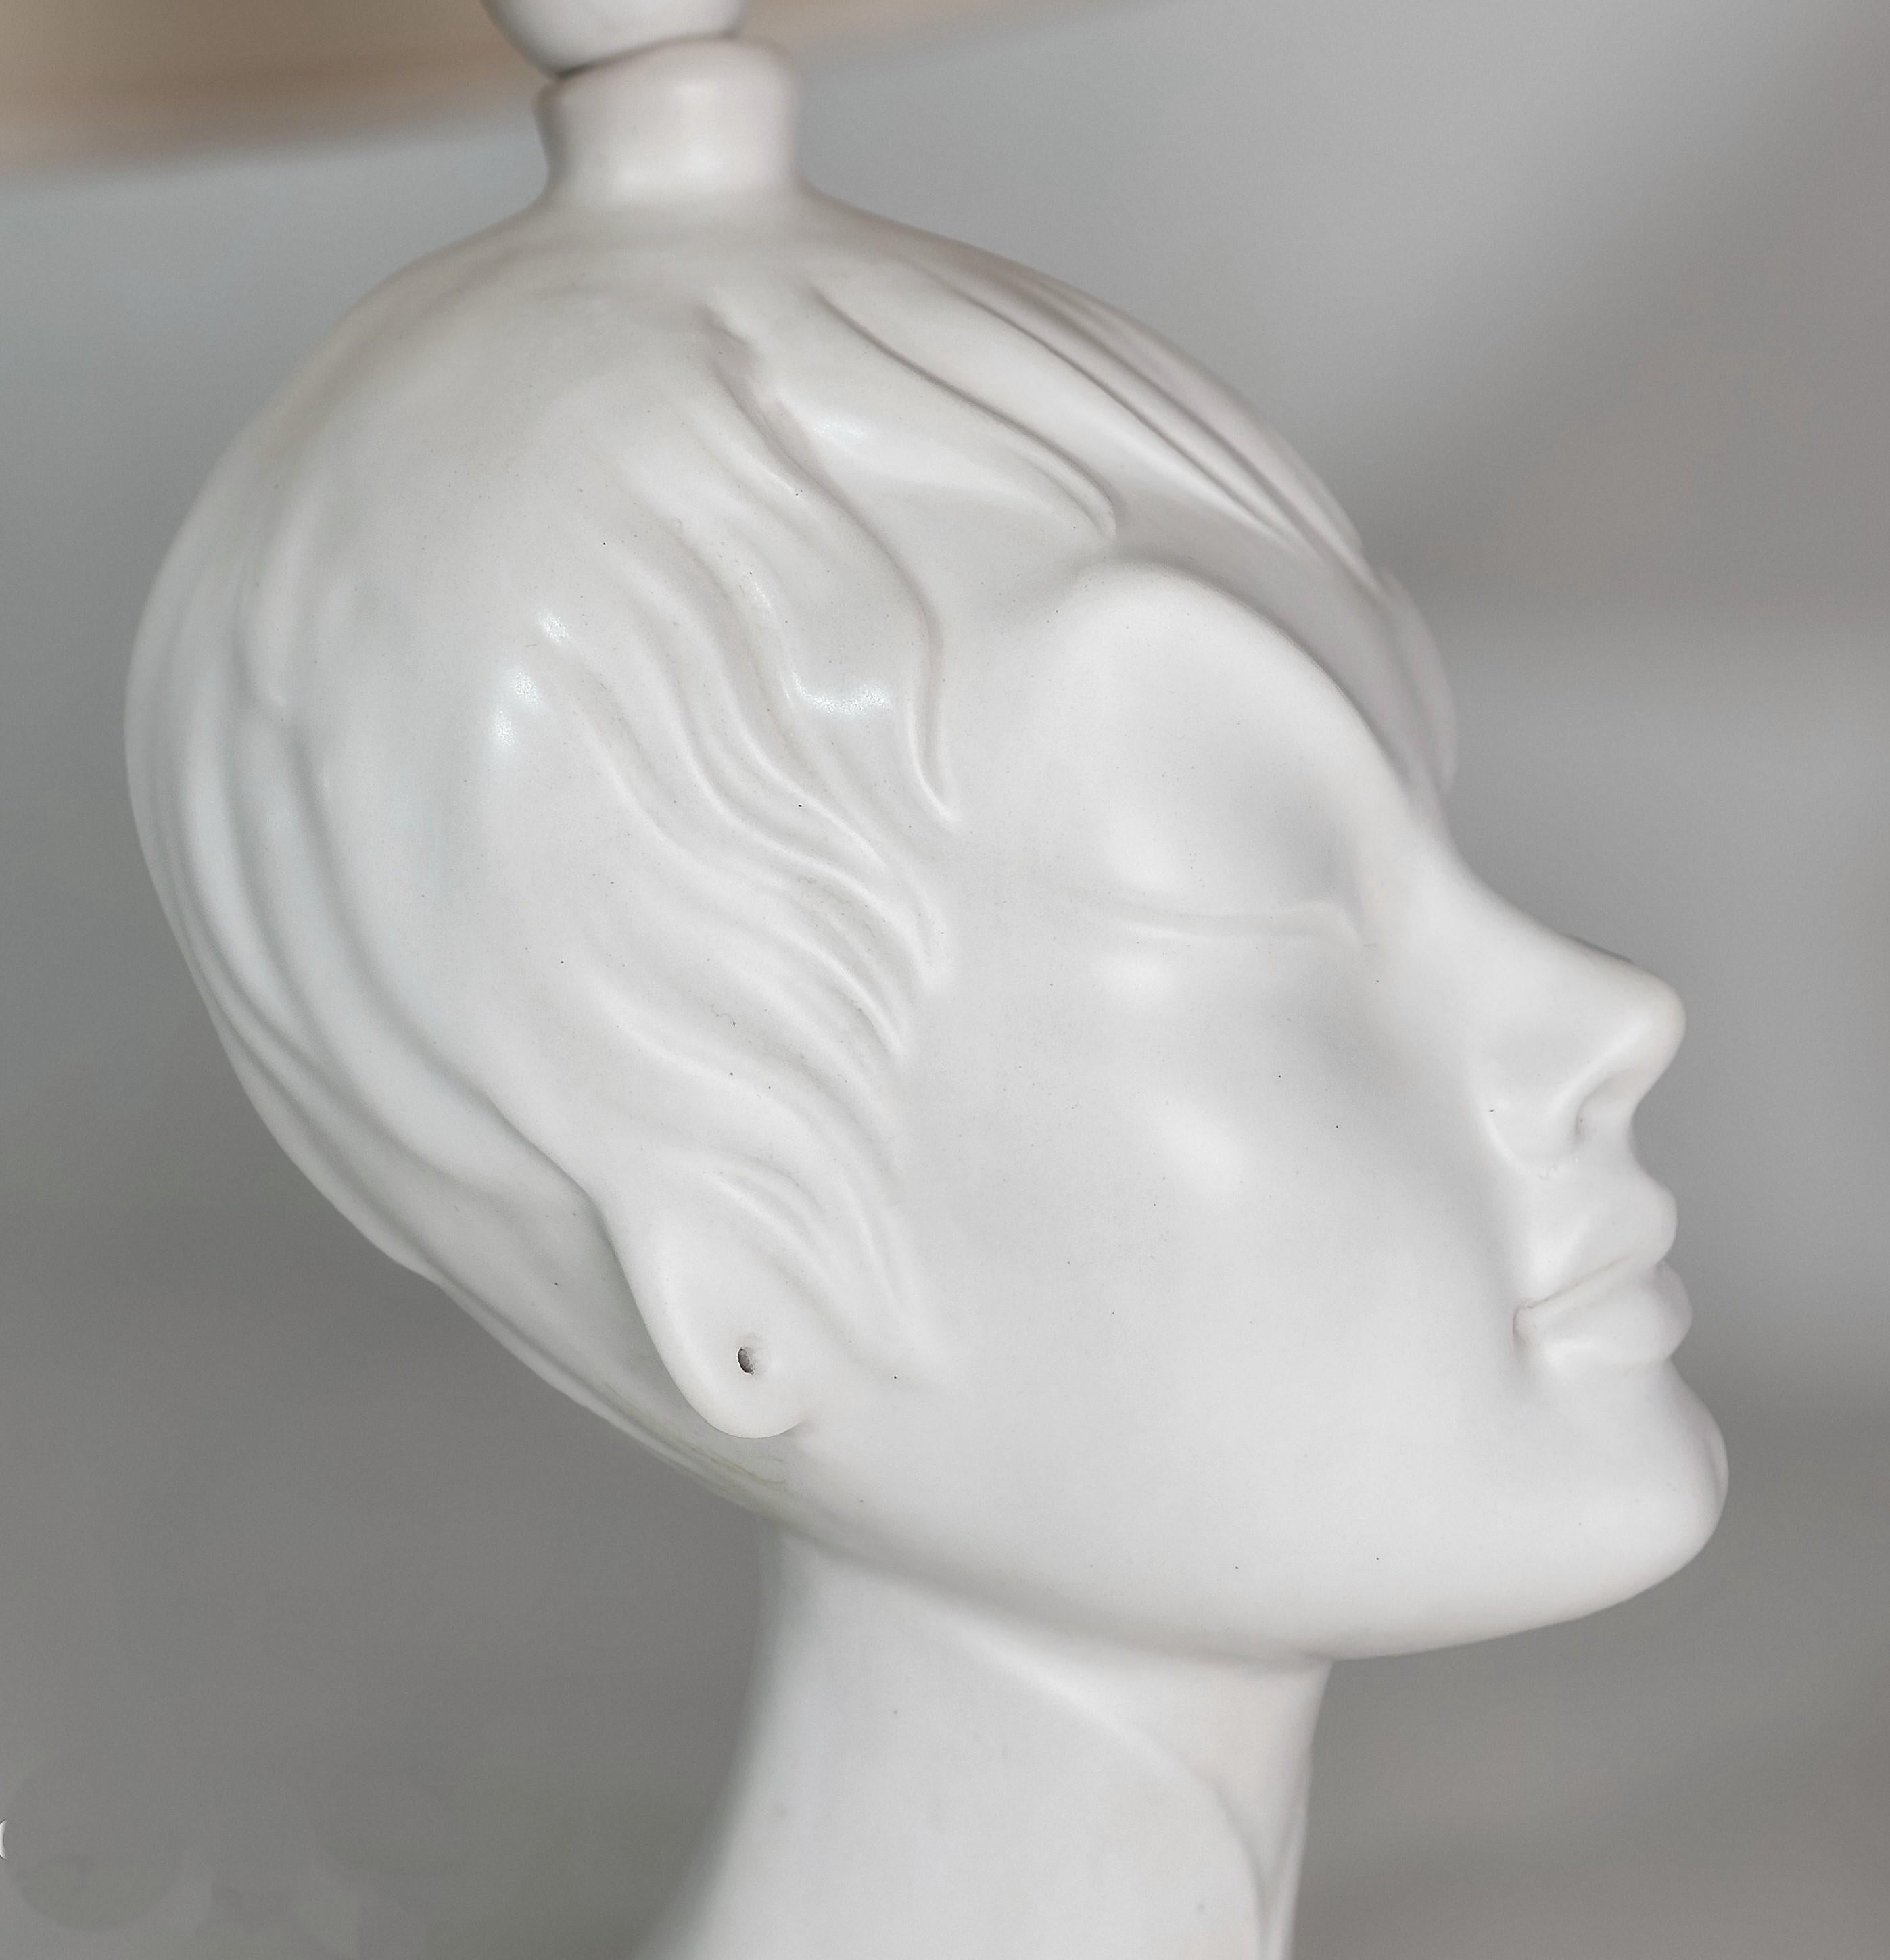 1960s table lamp with Sicas Sesto Fiorentino signature underneath. The lamp was made with a woman's face with Asian features in white matt ceramic with a conical lampshade in shiny plastic material in shades of beige.


Note: We try to offer our